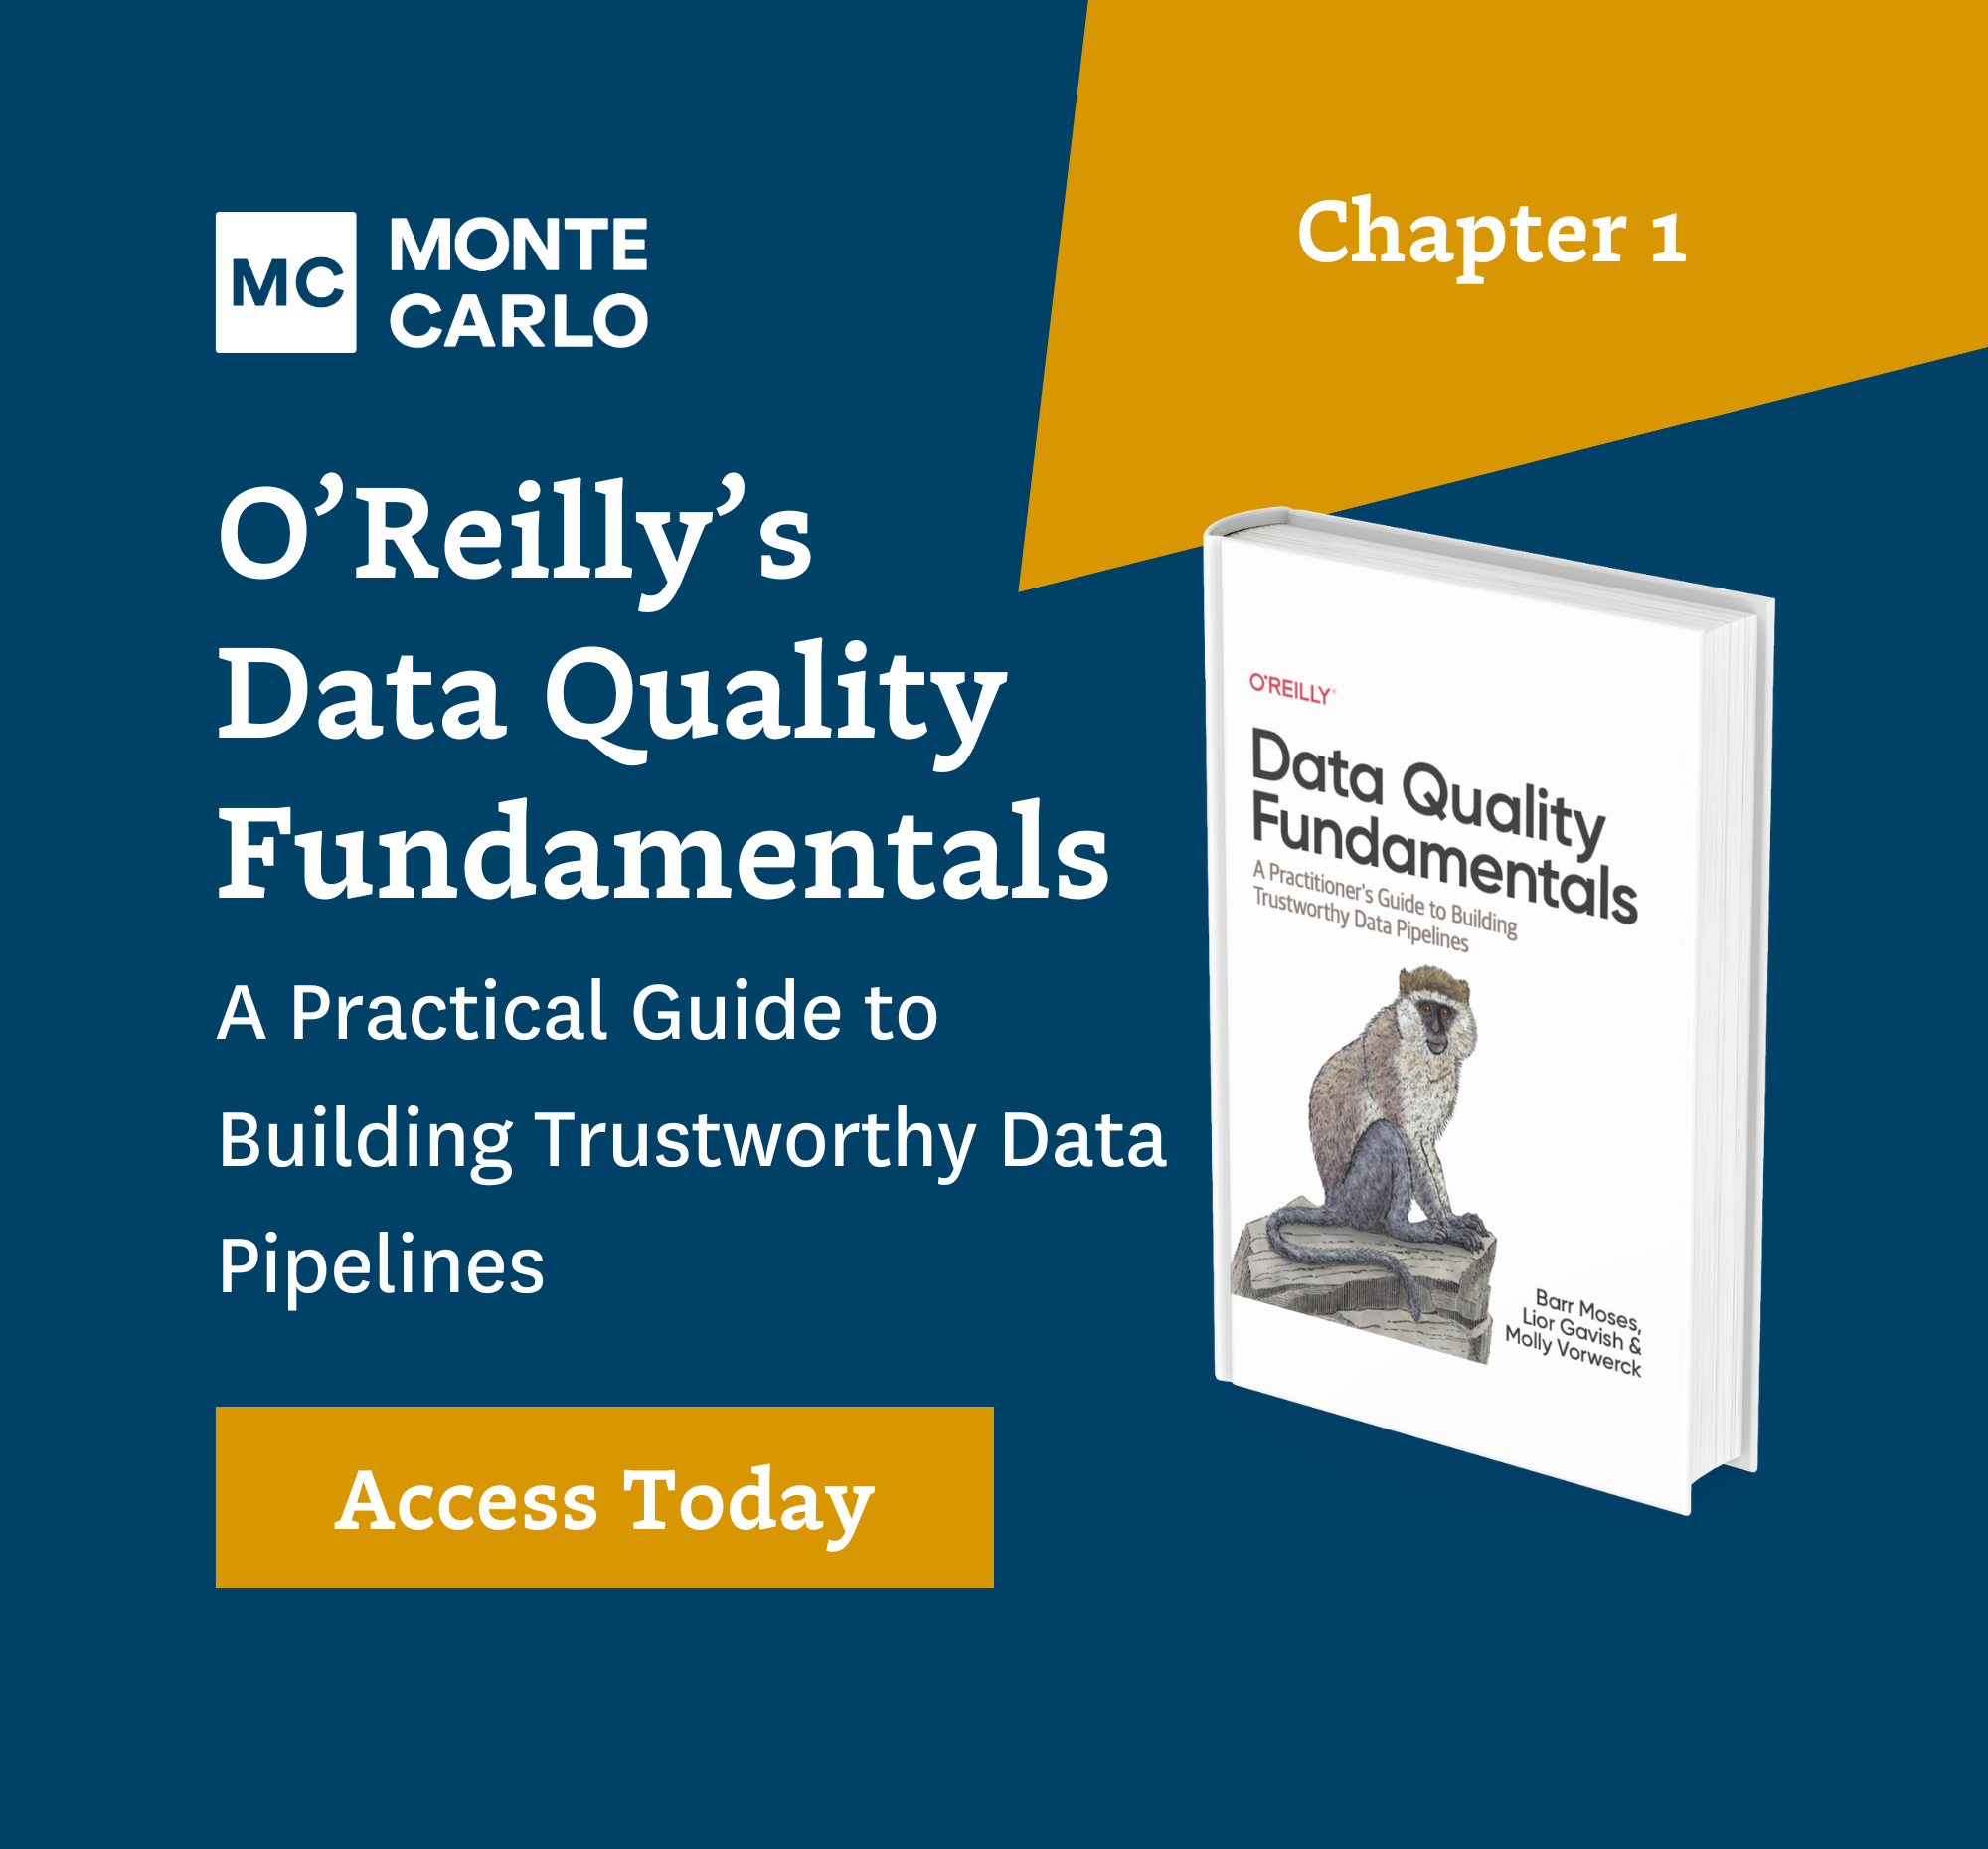 [O’Reilly Book] Chapter 1: Why Data Quality Deserves Attention Now